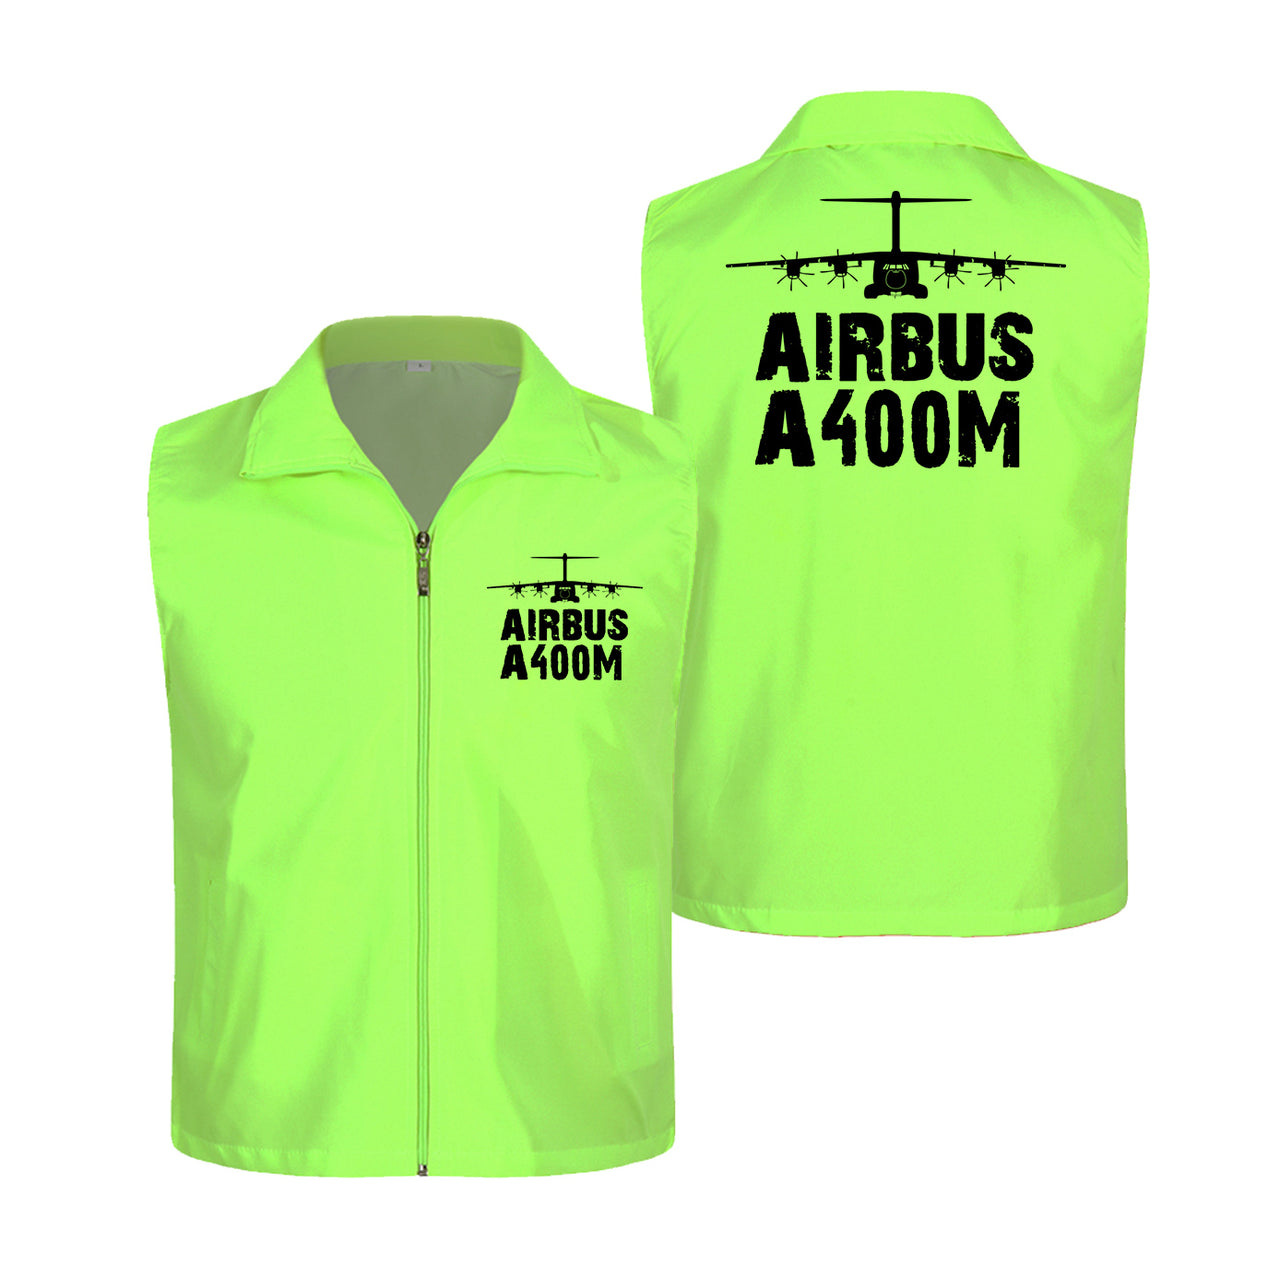 Airbus A400M & Plane Designed Thin Style Vests